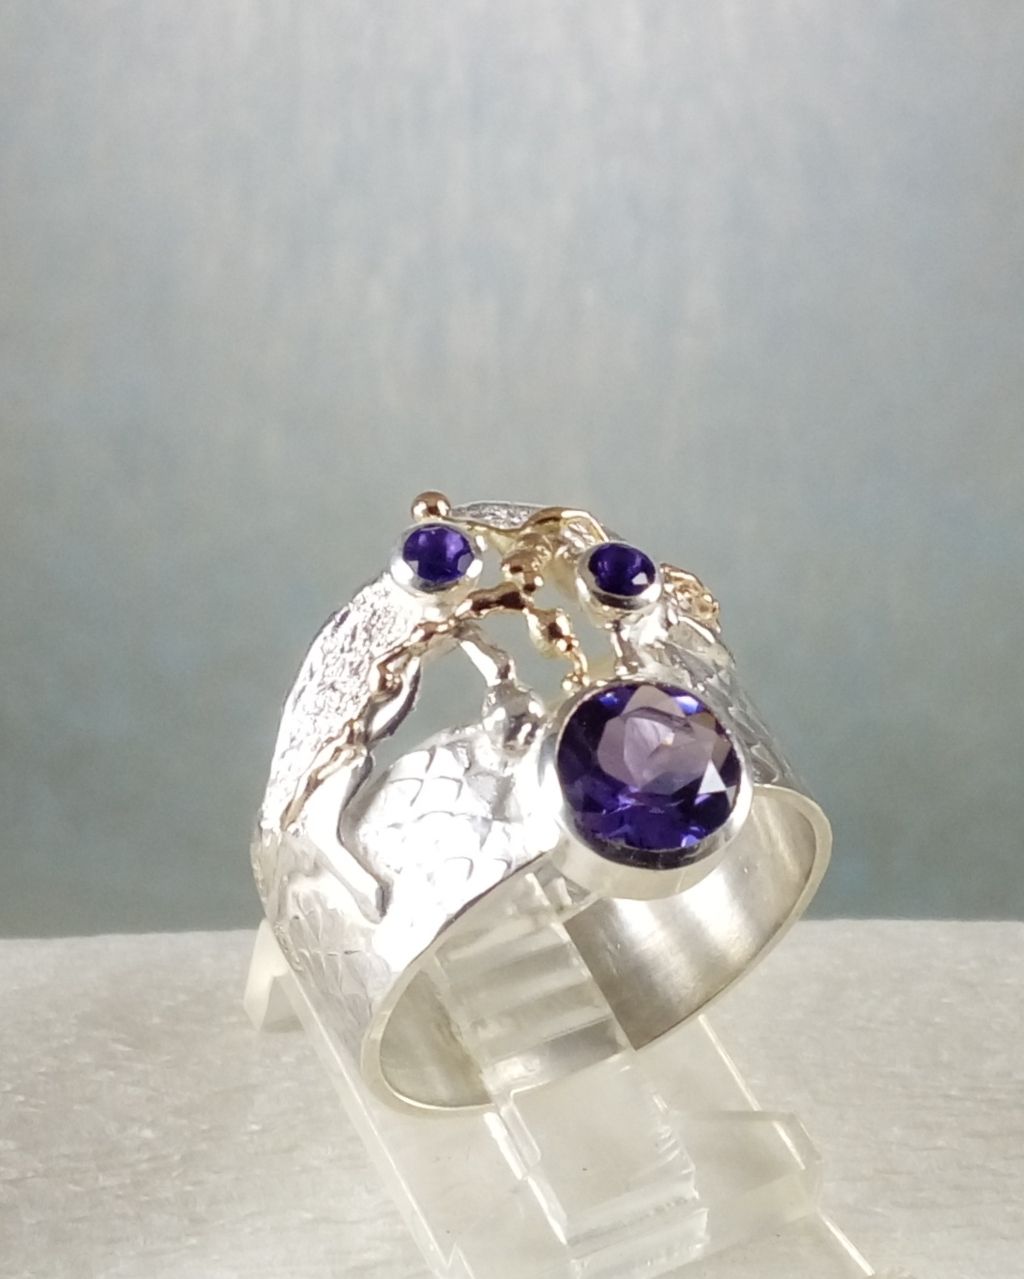 where to buy handmade jewelry made by artist, real natural pearls and semi precious stone jewellery, contemporary jewellery collectibles, handcrafted collectible jewellery, collectible jewellery made by artist, artisan made jewellery collectible, handcrafted ring with amethyst, sterling silver and 14k gold ring, gregory pyra piro ring 6820